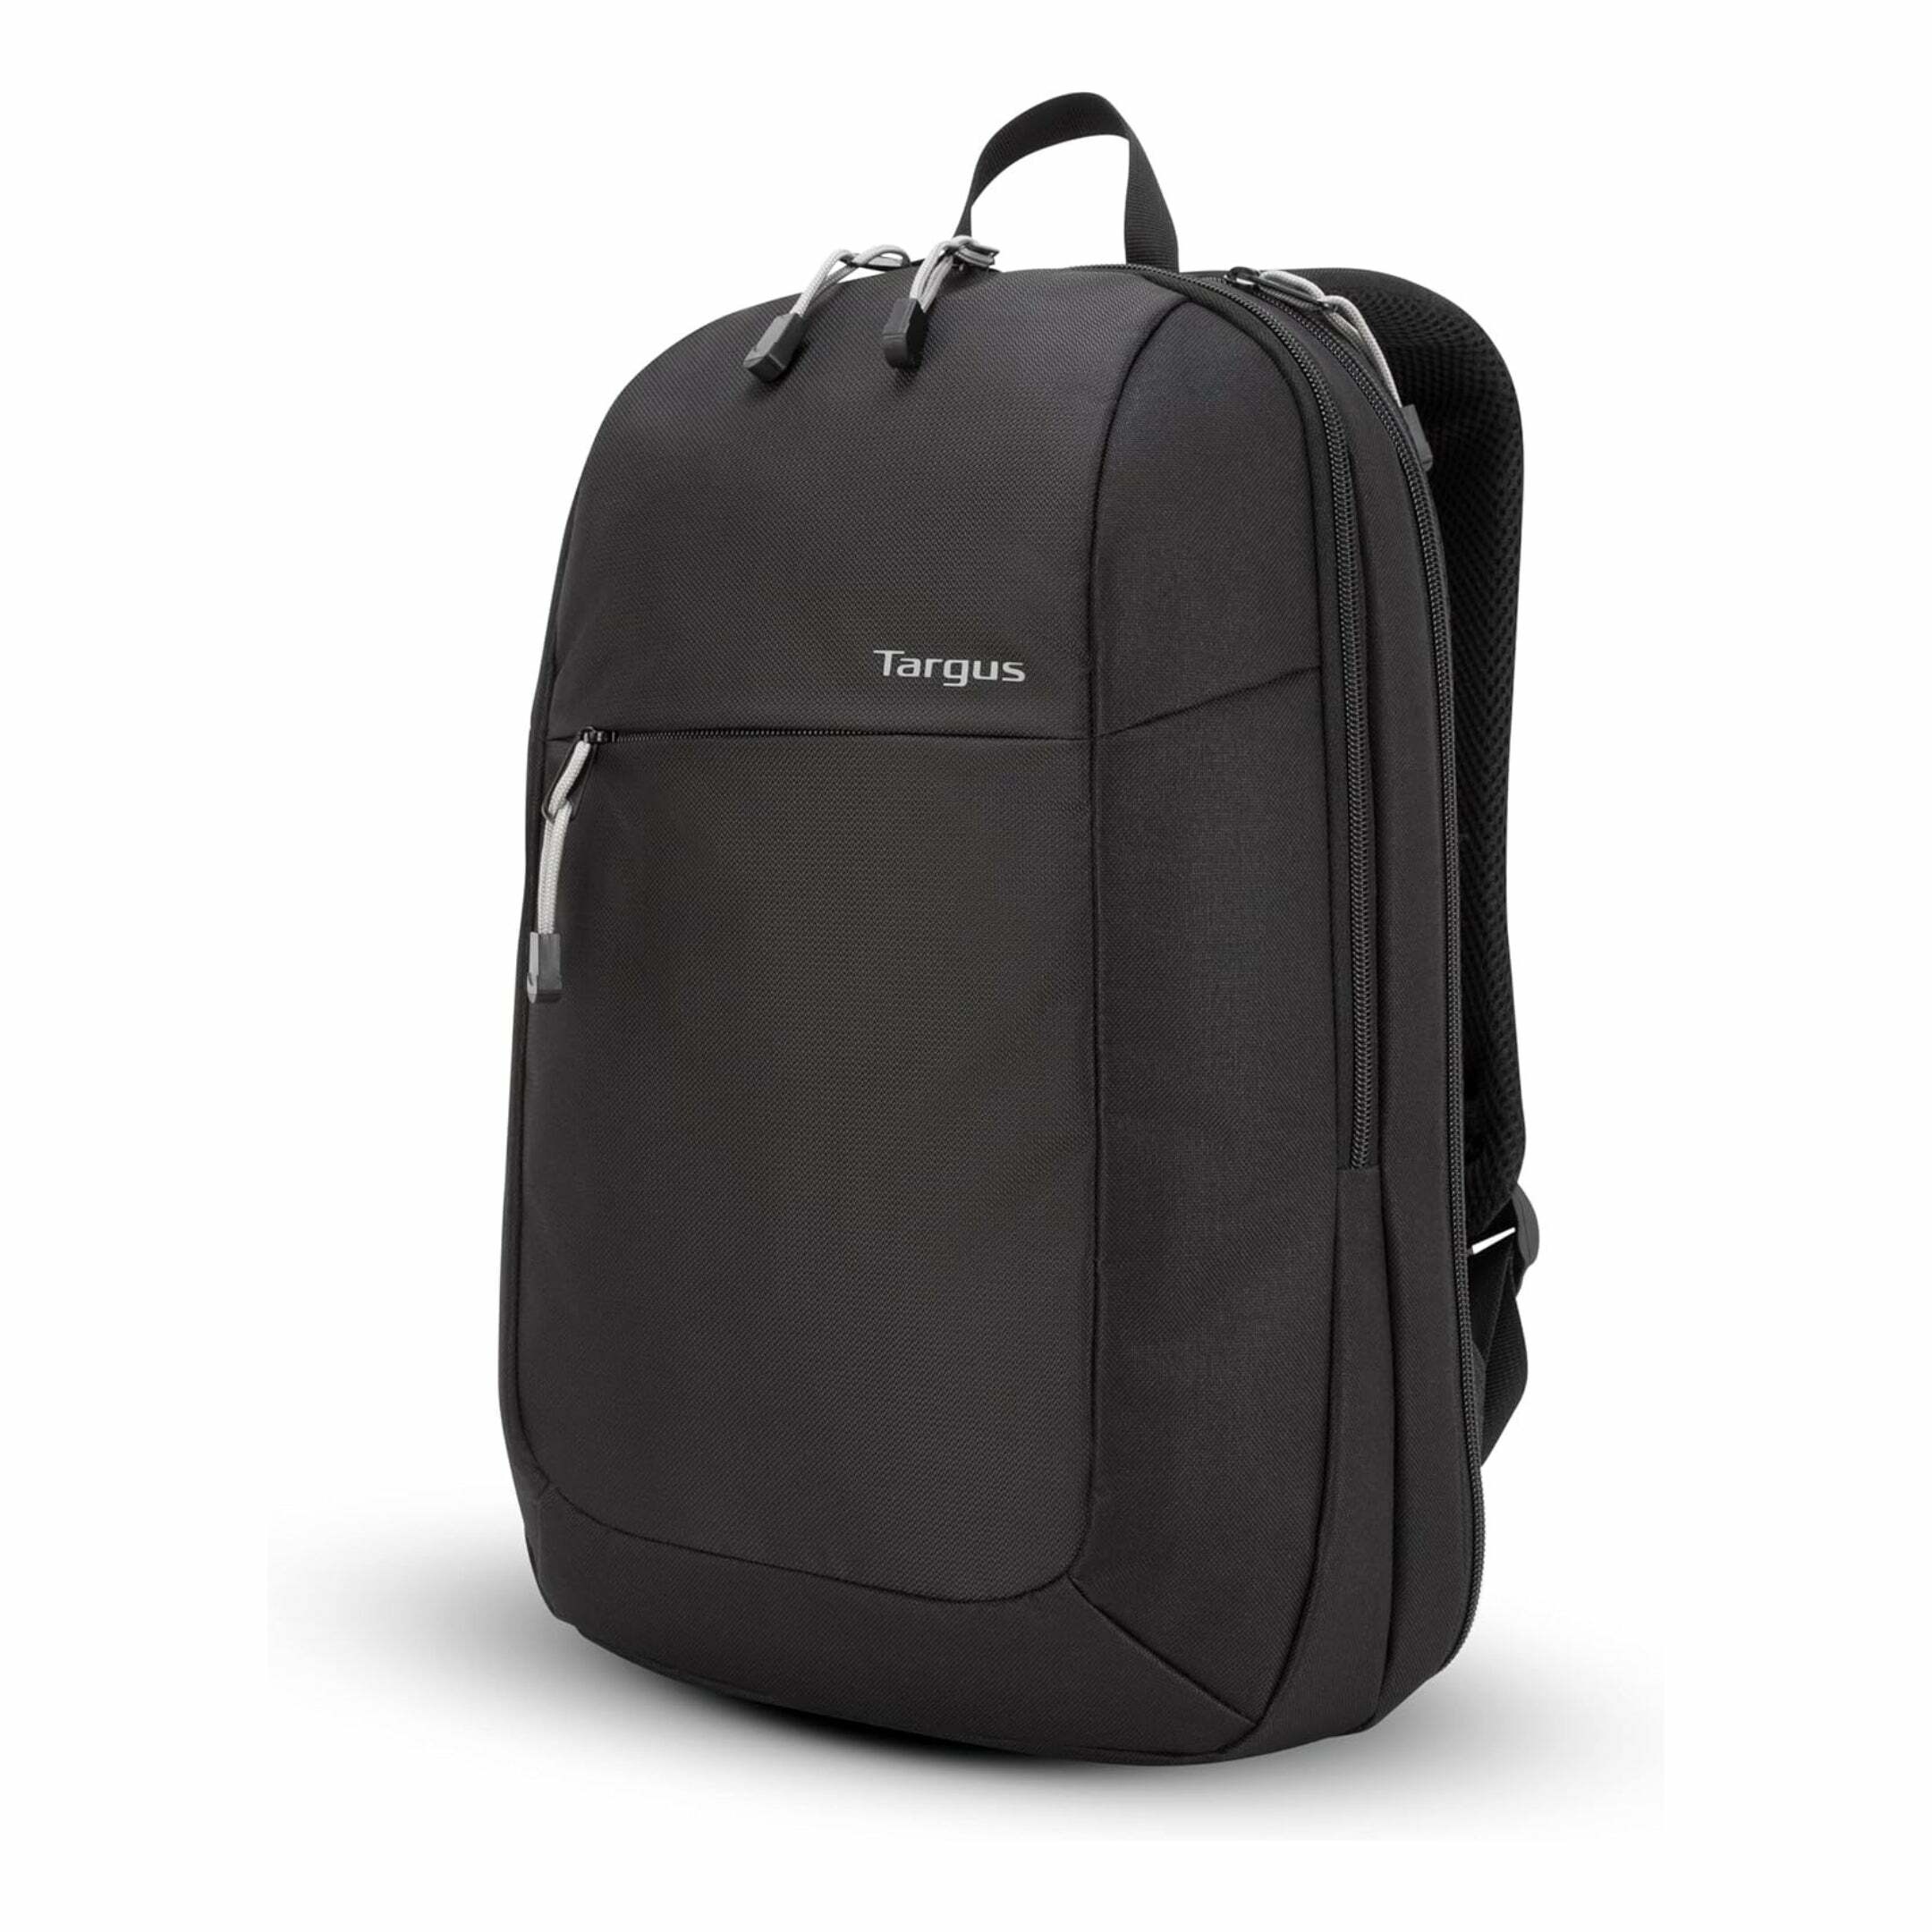 Targus Intellect Essentials Backpack for 15.6-Inch Laptop - Black